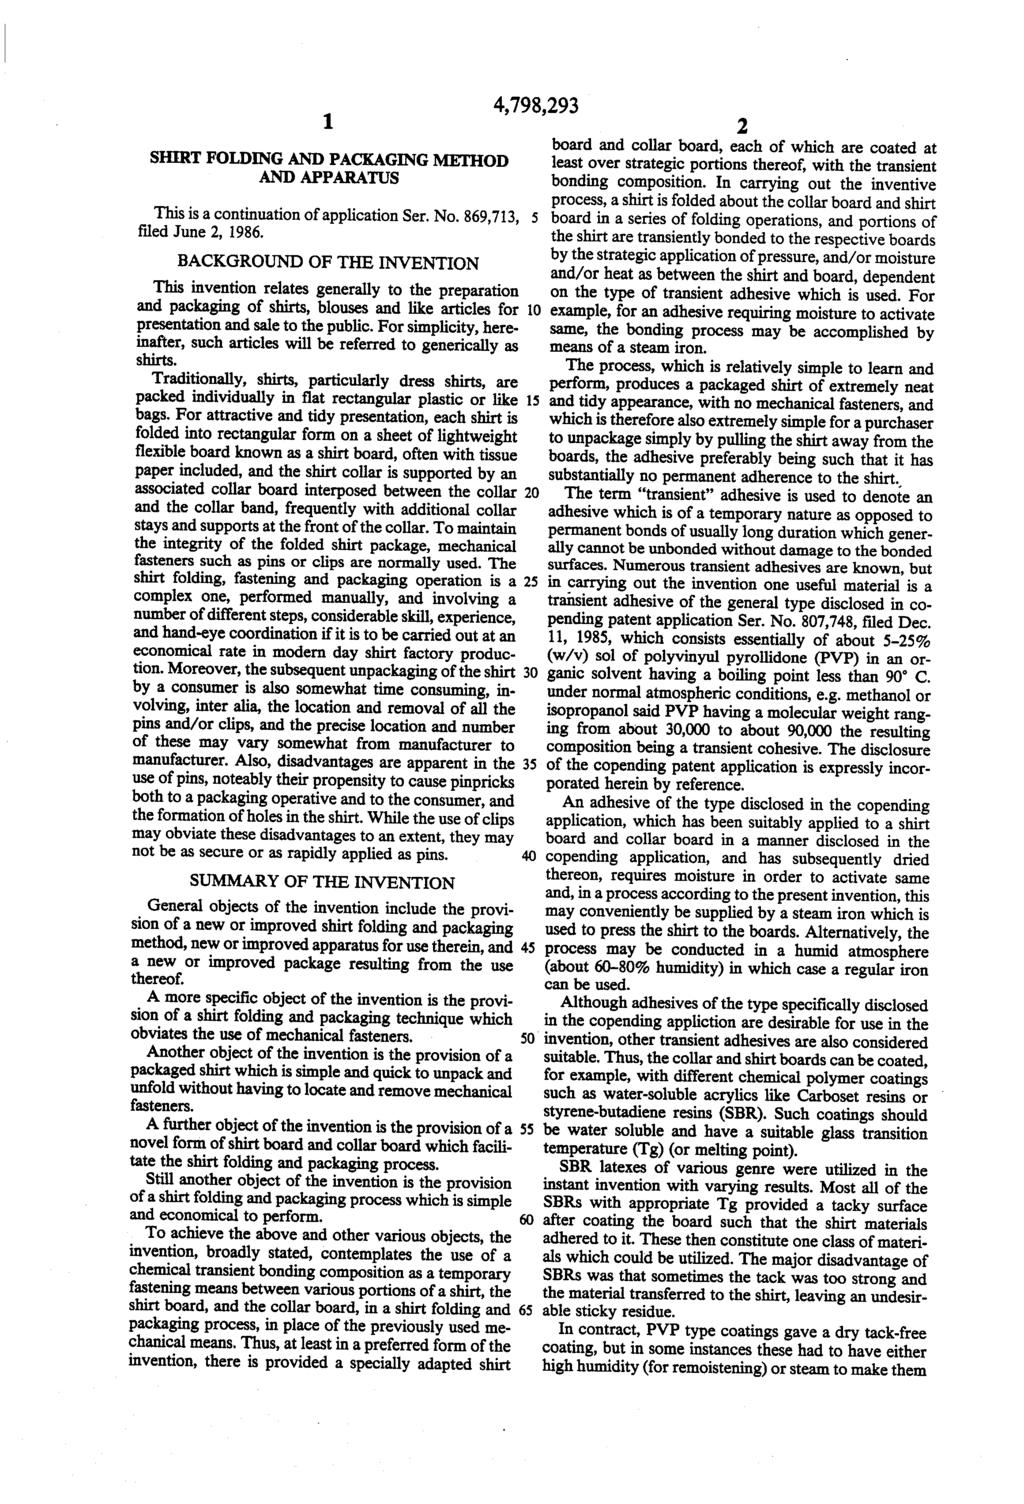 1 SHRT FOLDING AND PACKAGNG METHOD AND APPARATUS This is a continuation of application Ser. No. 869,713, filed June 2, 1986.